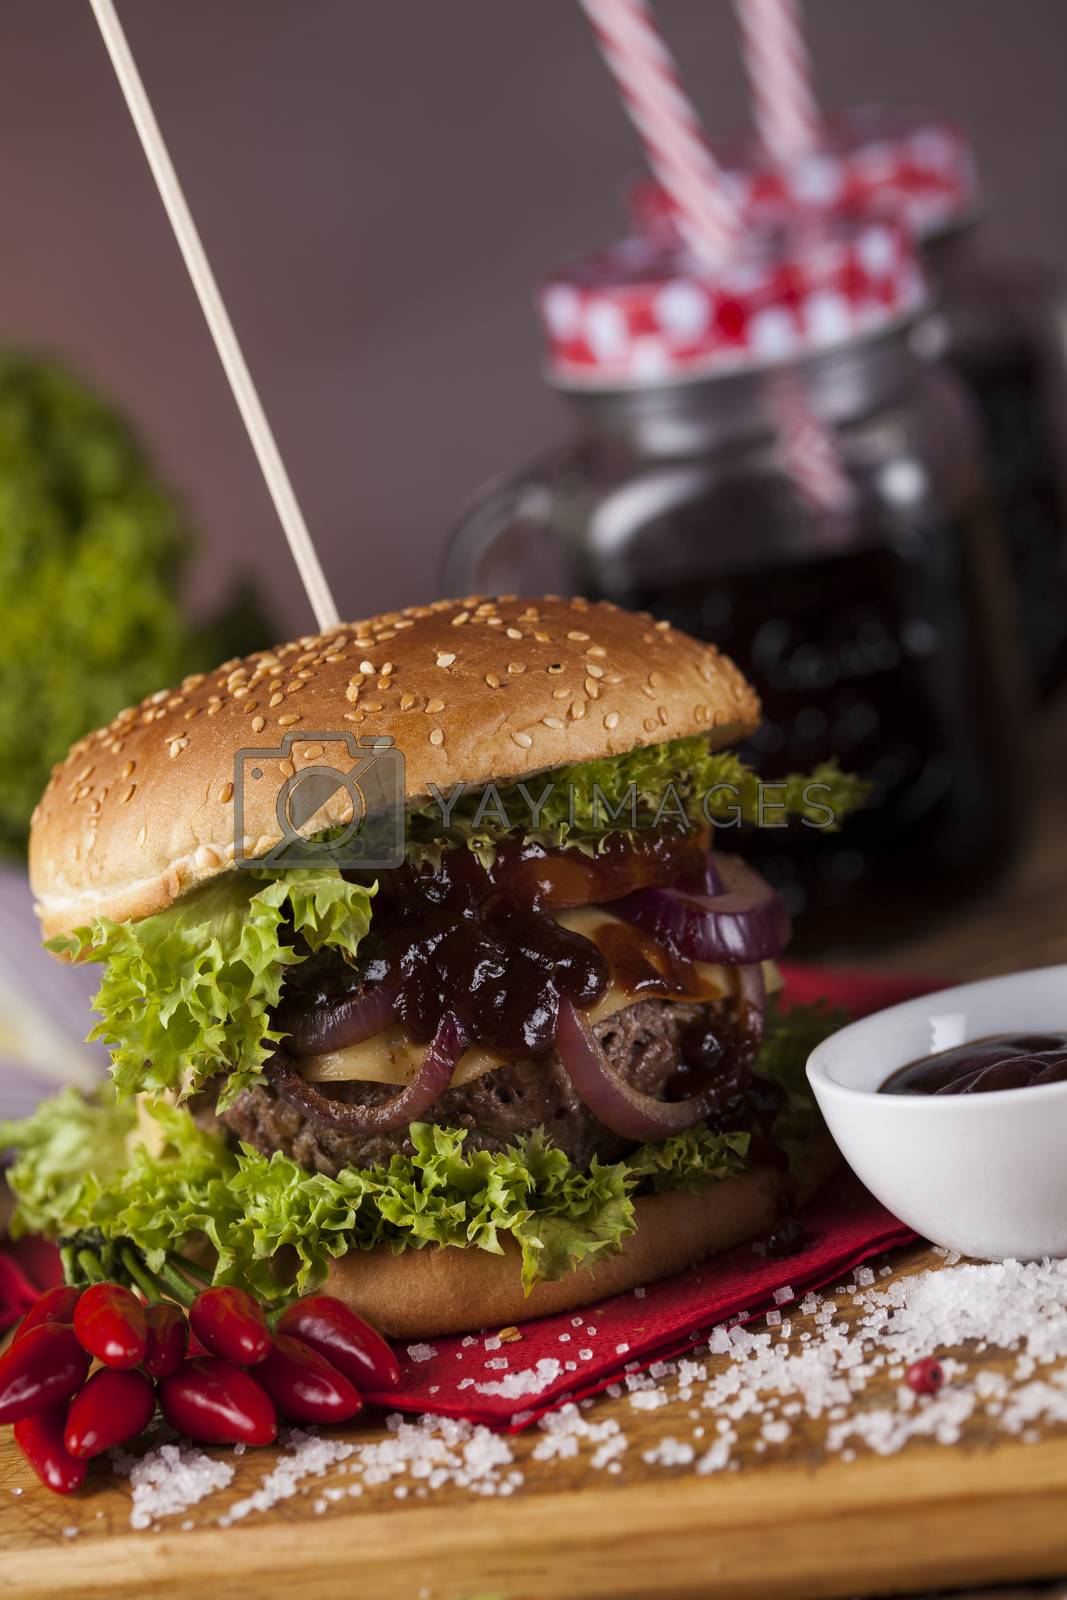 Royalty free image of Home made burgers on wooden background
 by JanPietruszka